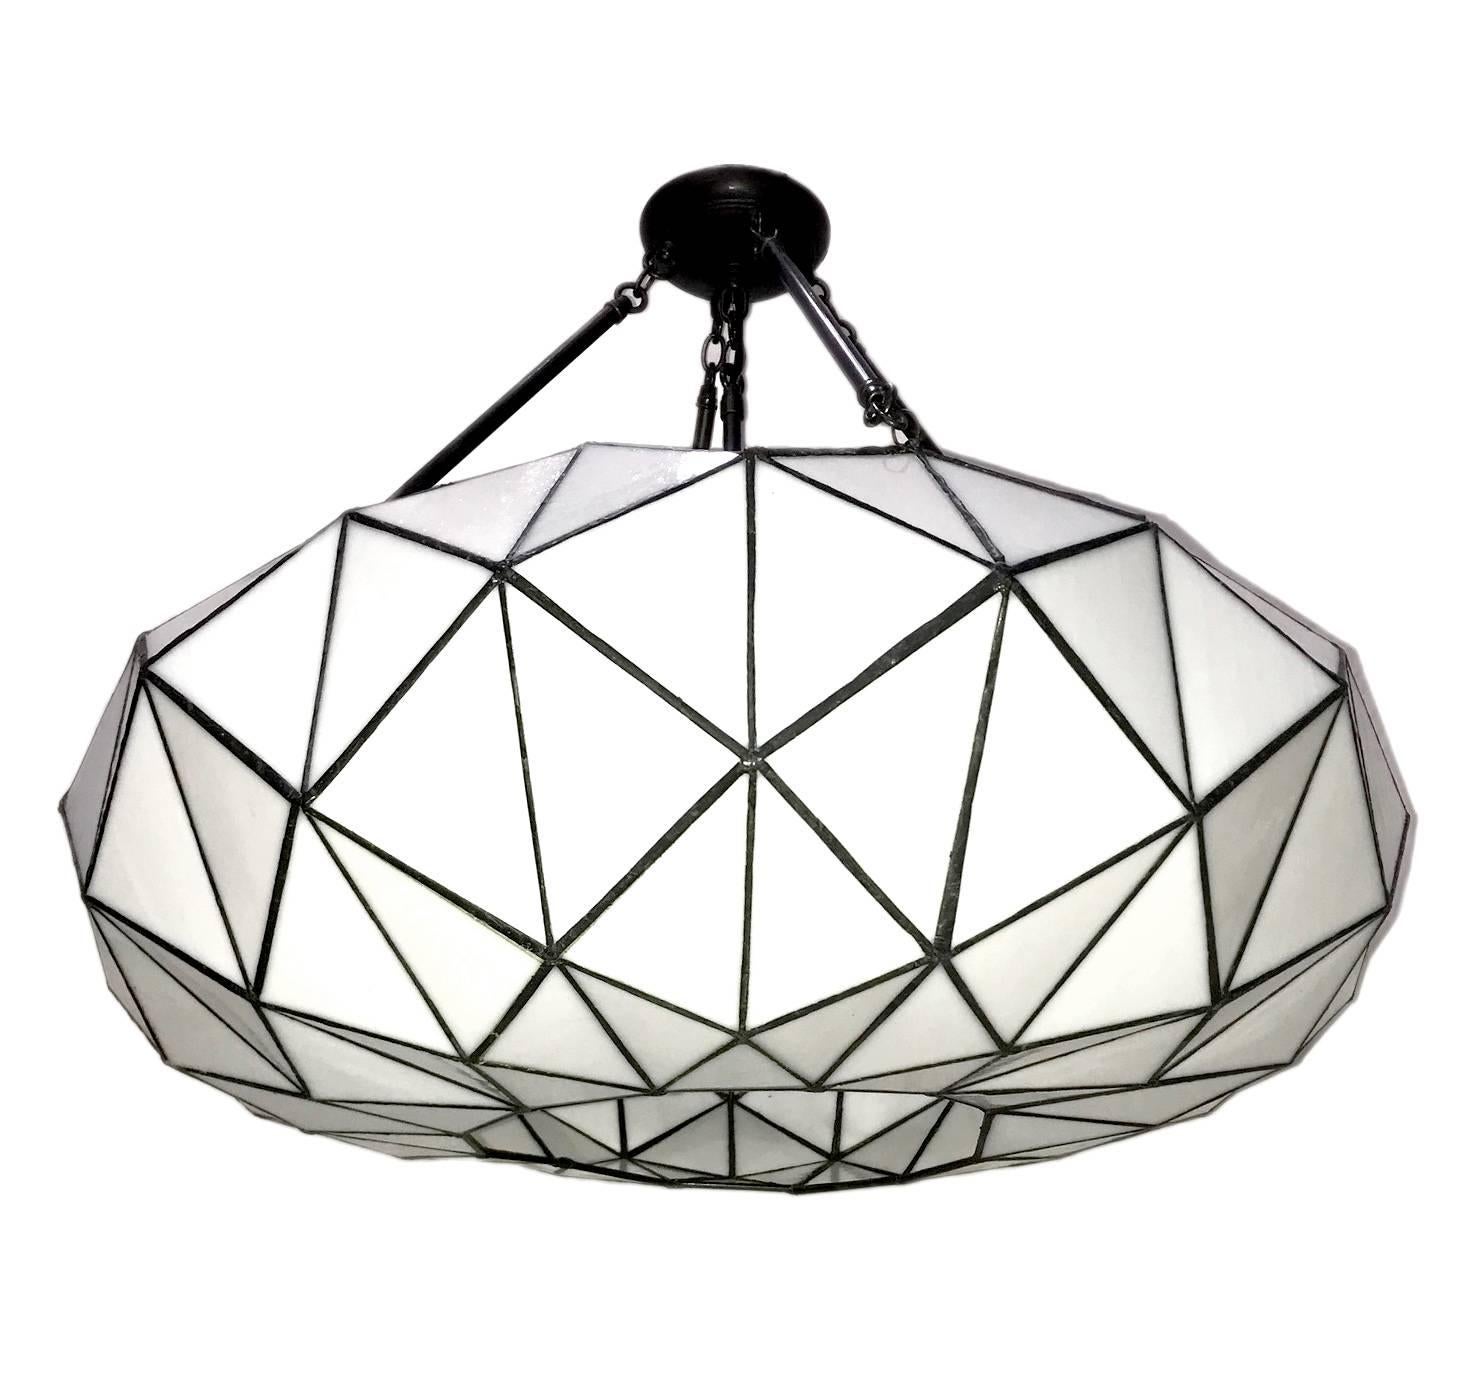 A French large polyhedral leaded glass light fixture with six interior lights, circa 1940s. 

Measurements:
35